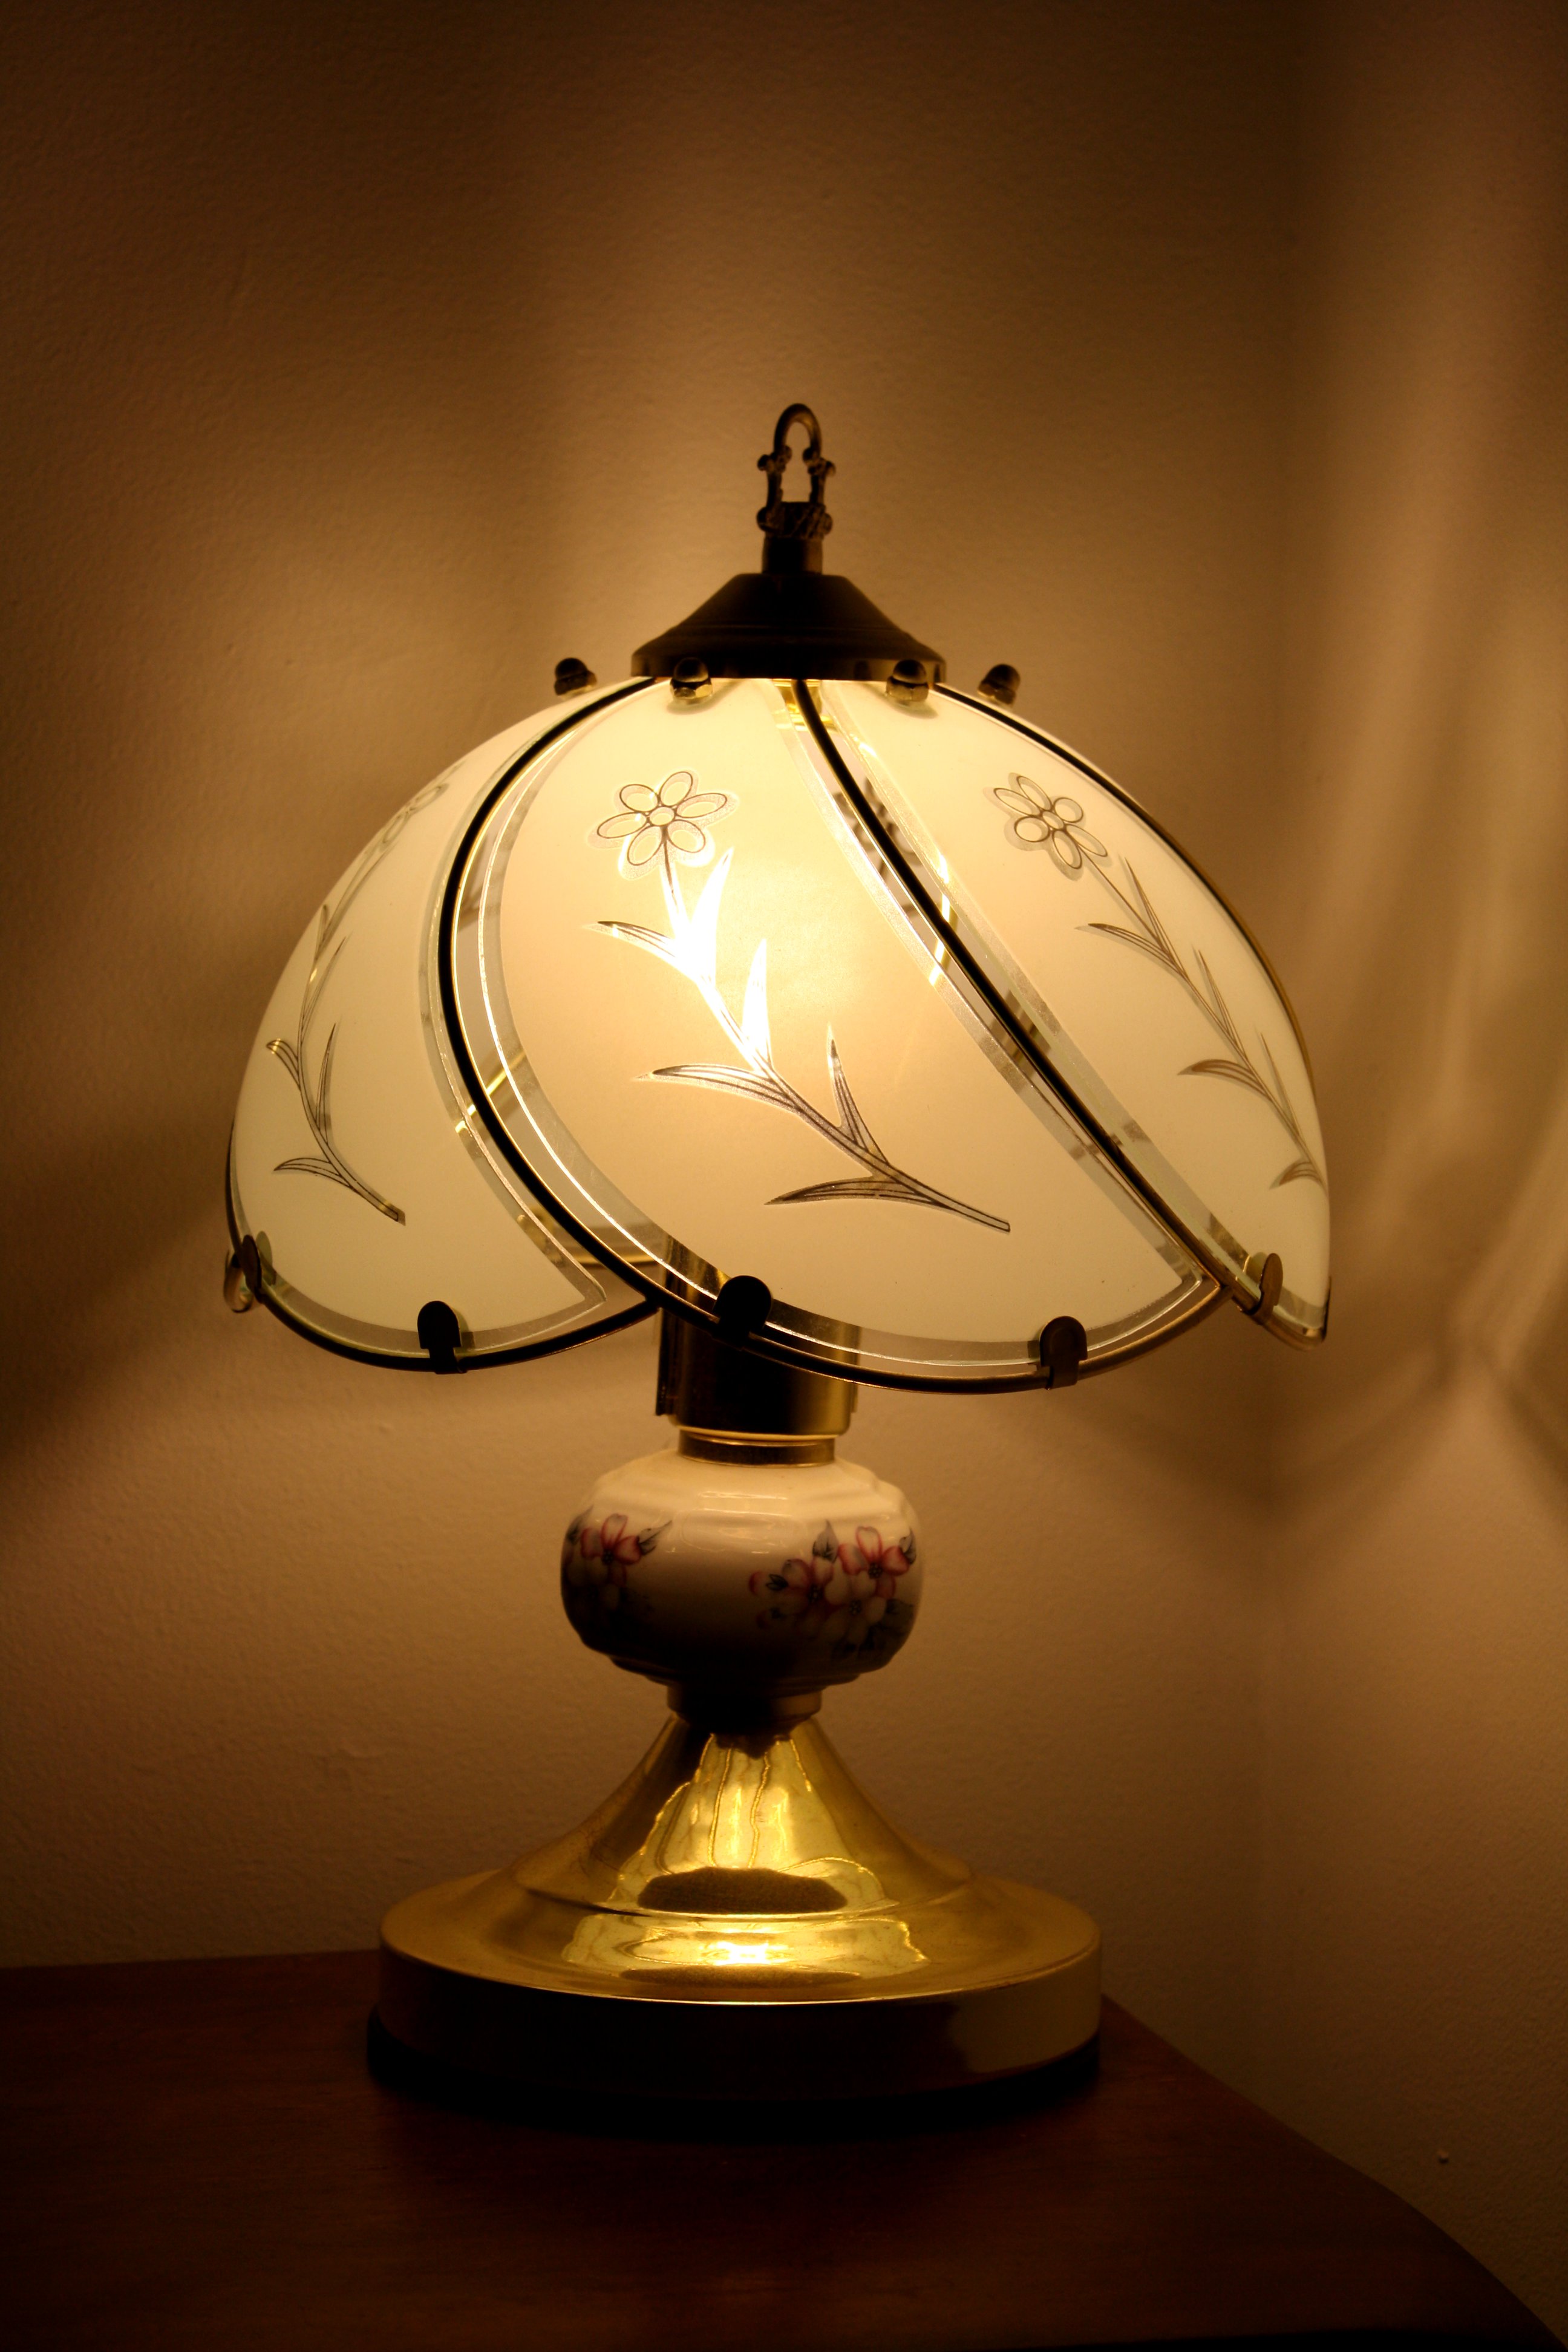 Bedside Lamp with Glass Shade Picture Free Photograph